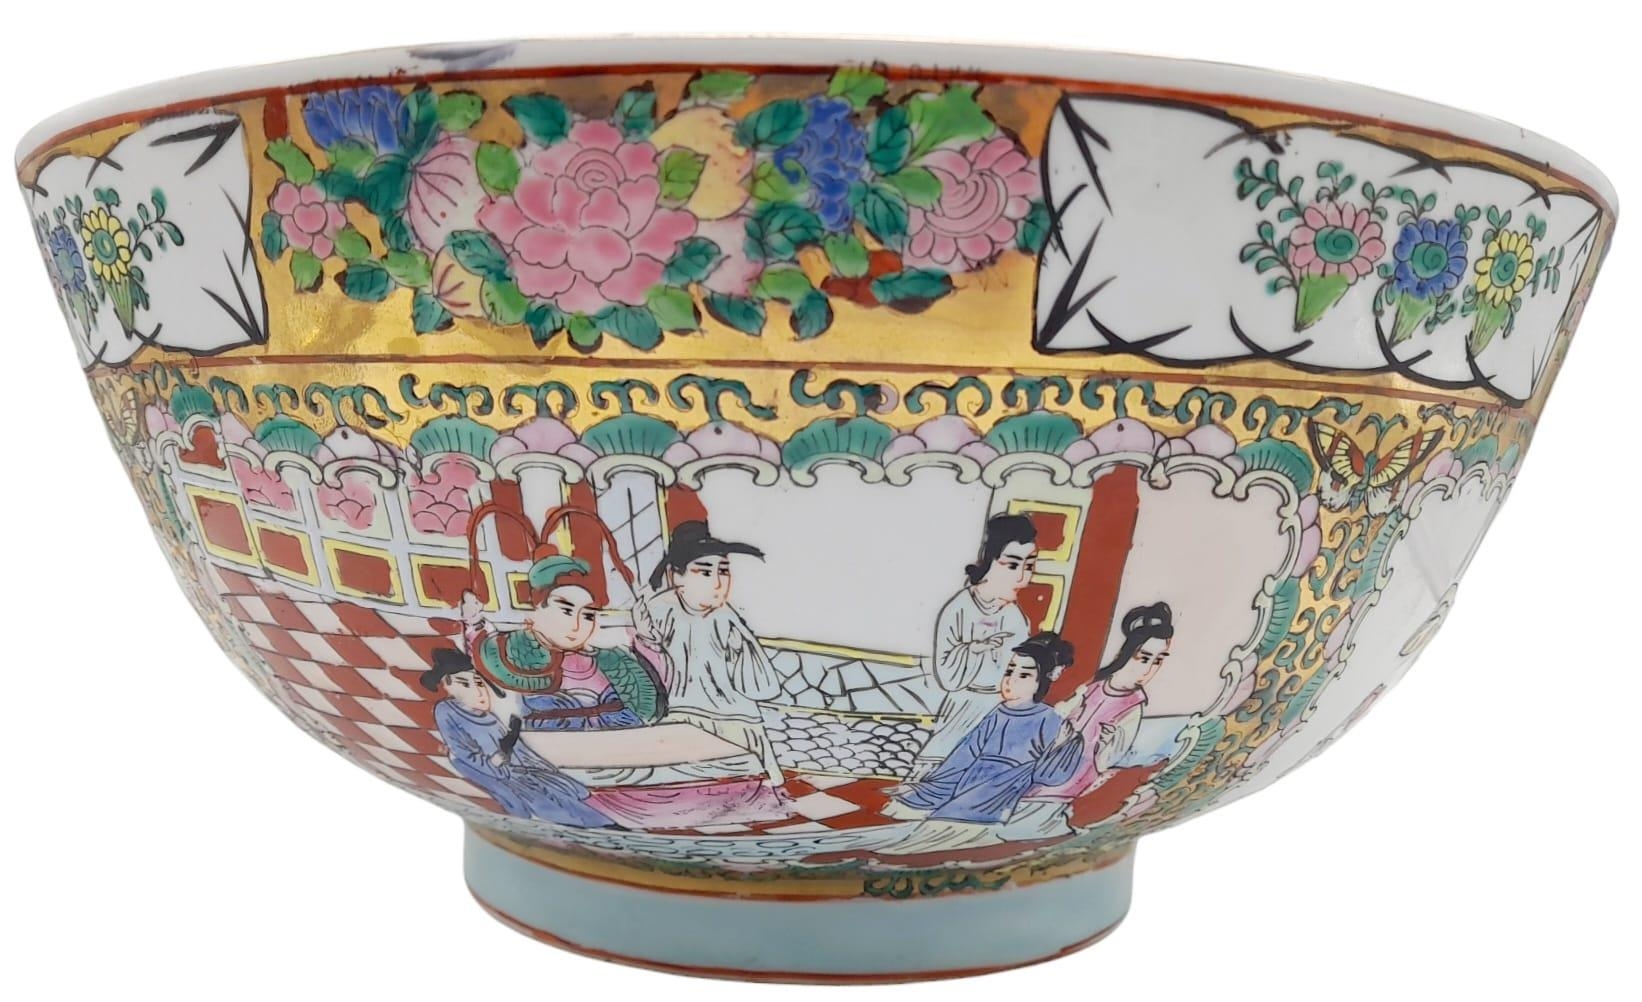 A Very Large Antique Chinese Famille Rose Bowl. Beautiful colours depicting court scenes amongst - Image 5 of 7